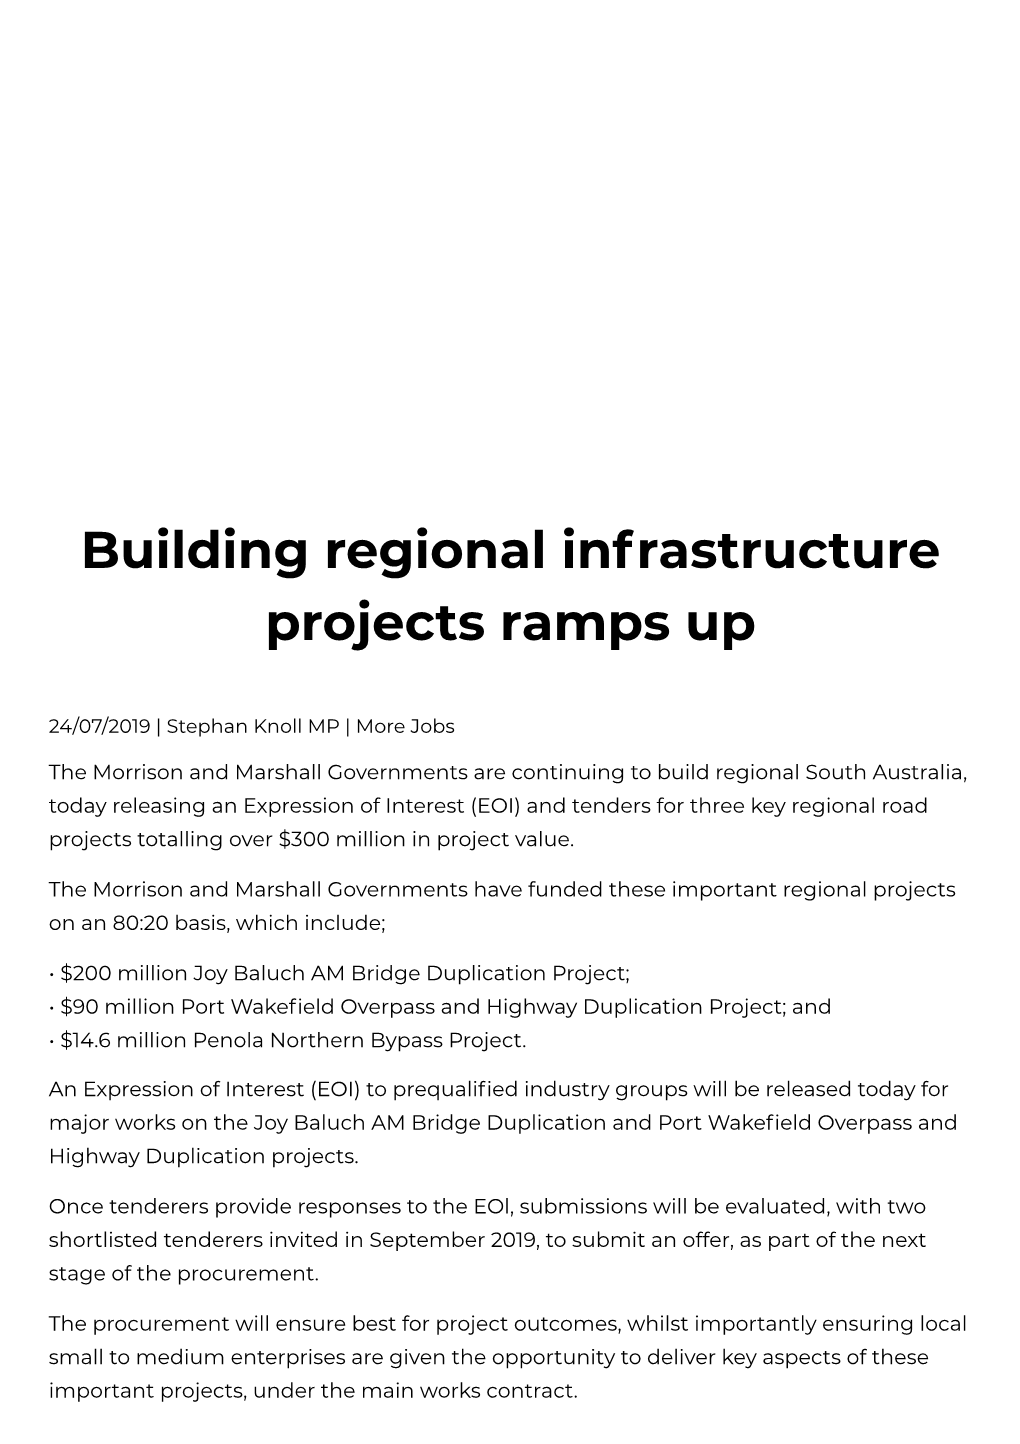 Building Regional Infrastructure Projects Ramps Up